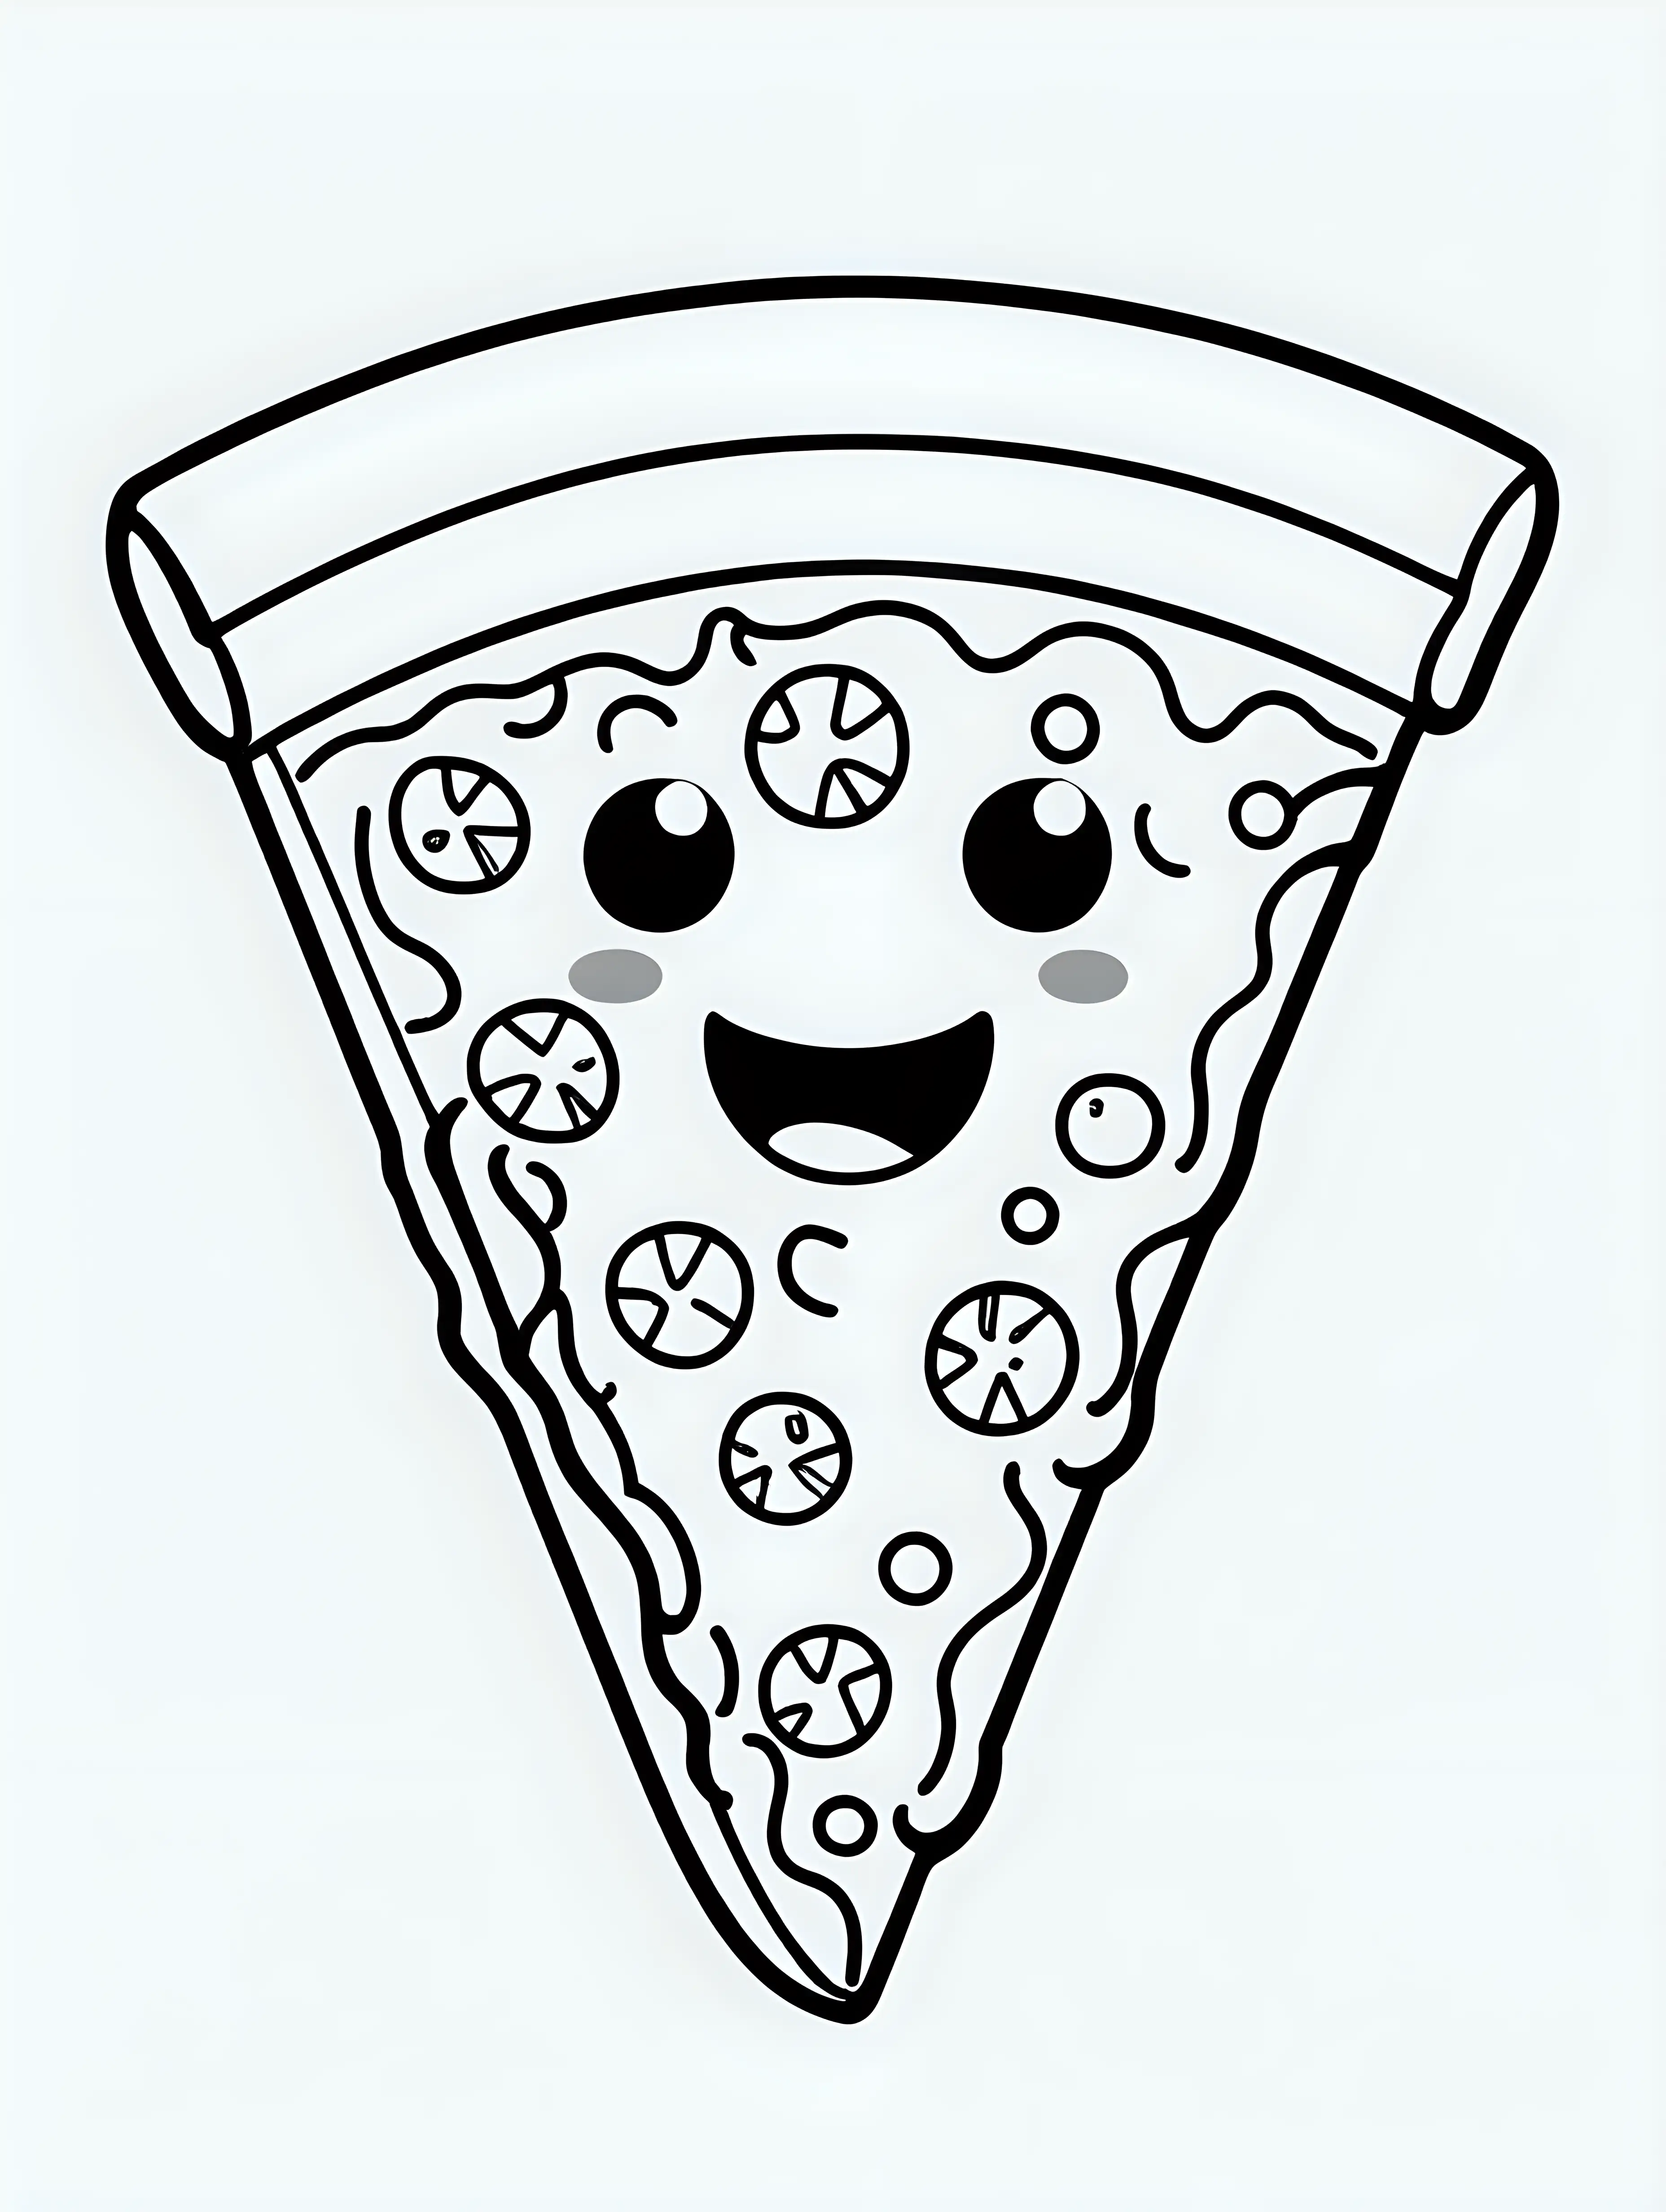 Adorable Cartoon Coloring Book Playful Pizza Slice and Cute Emojis